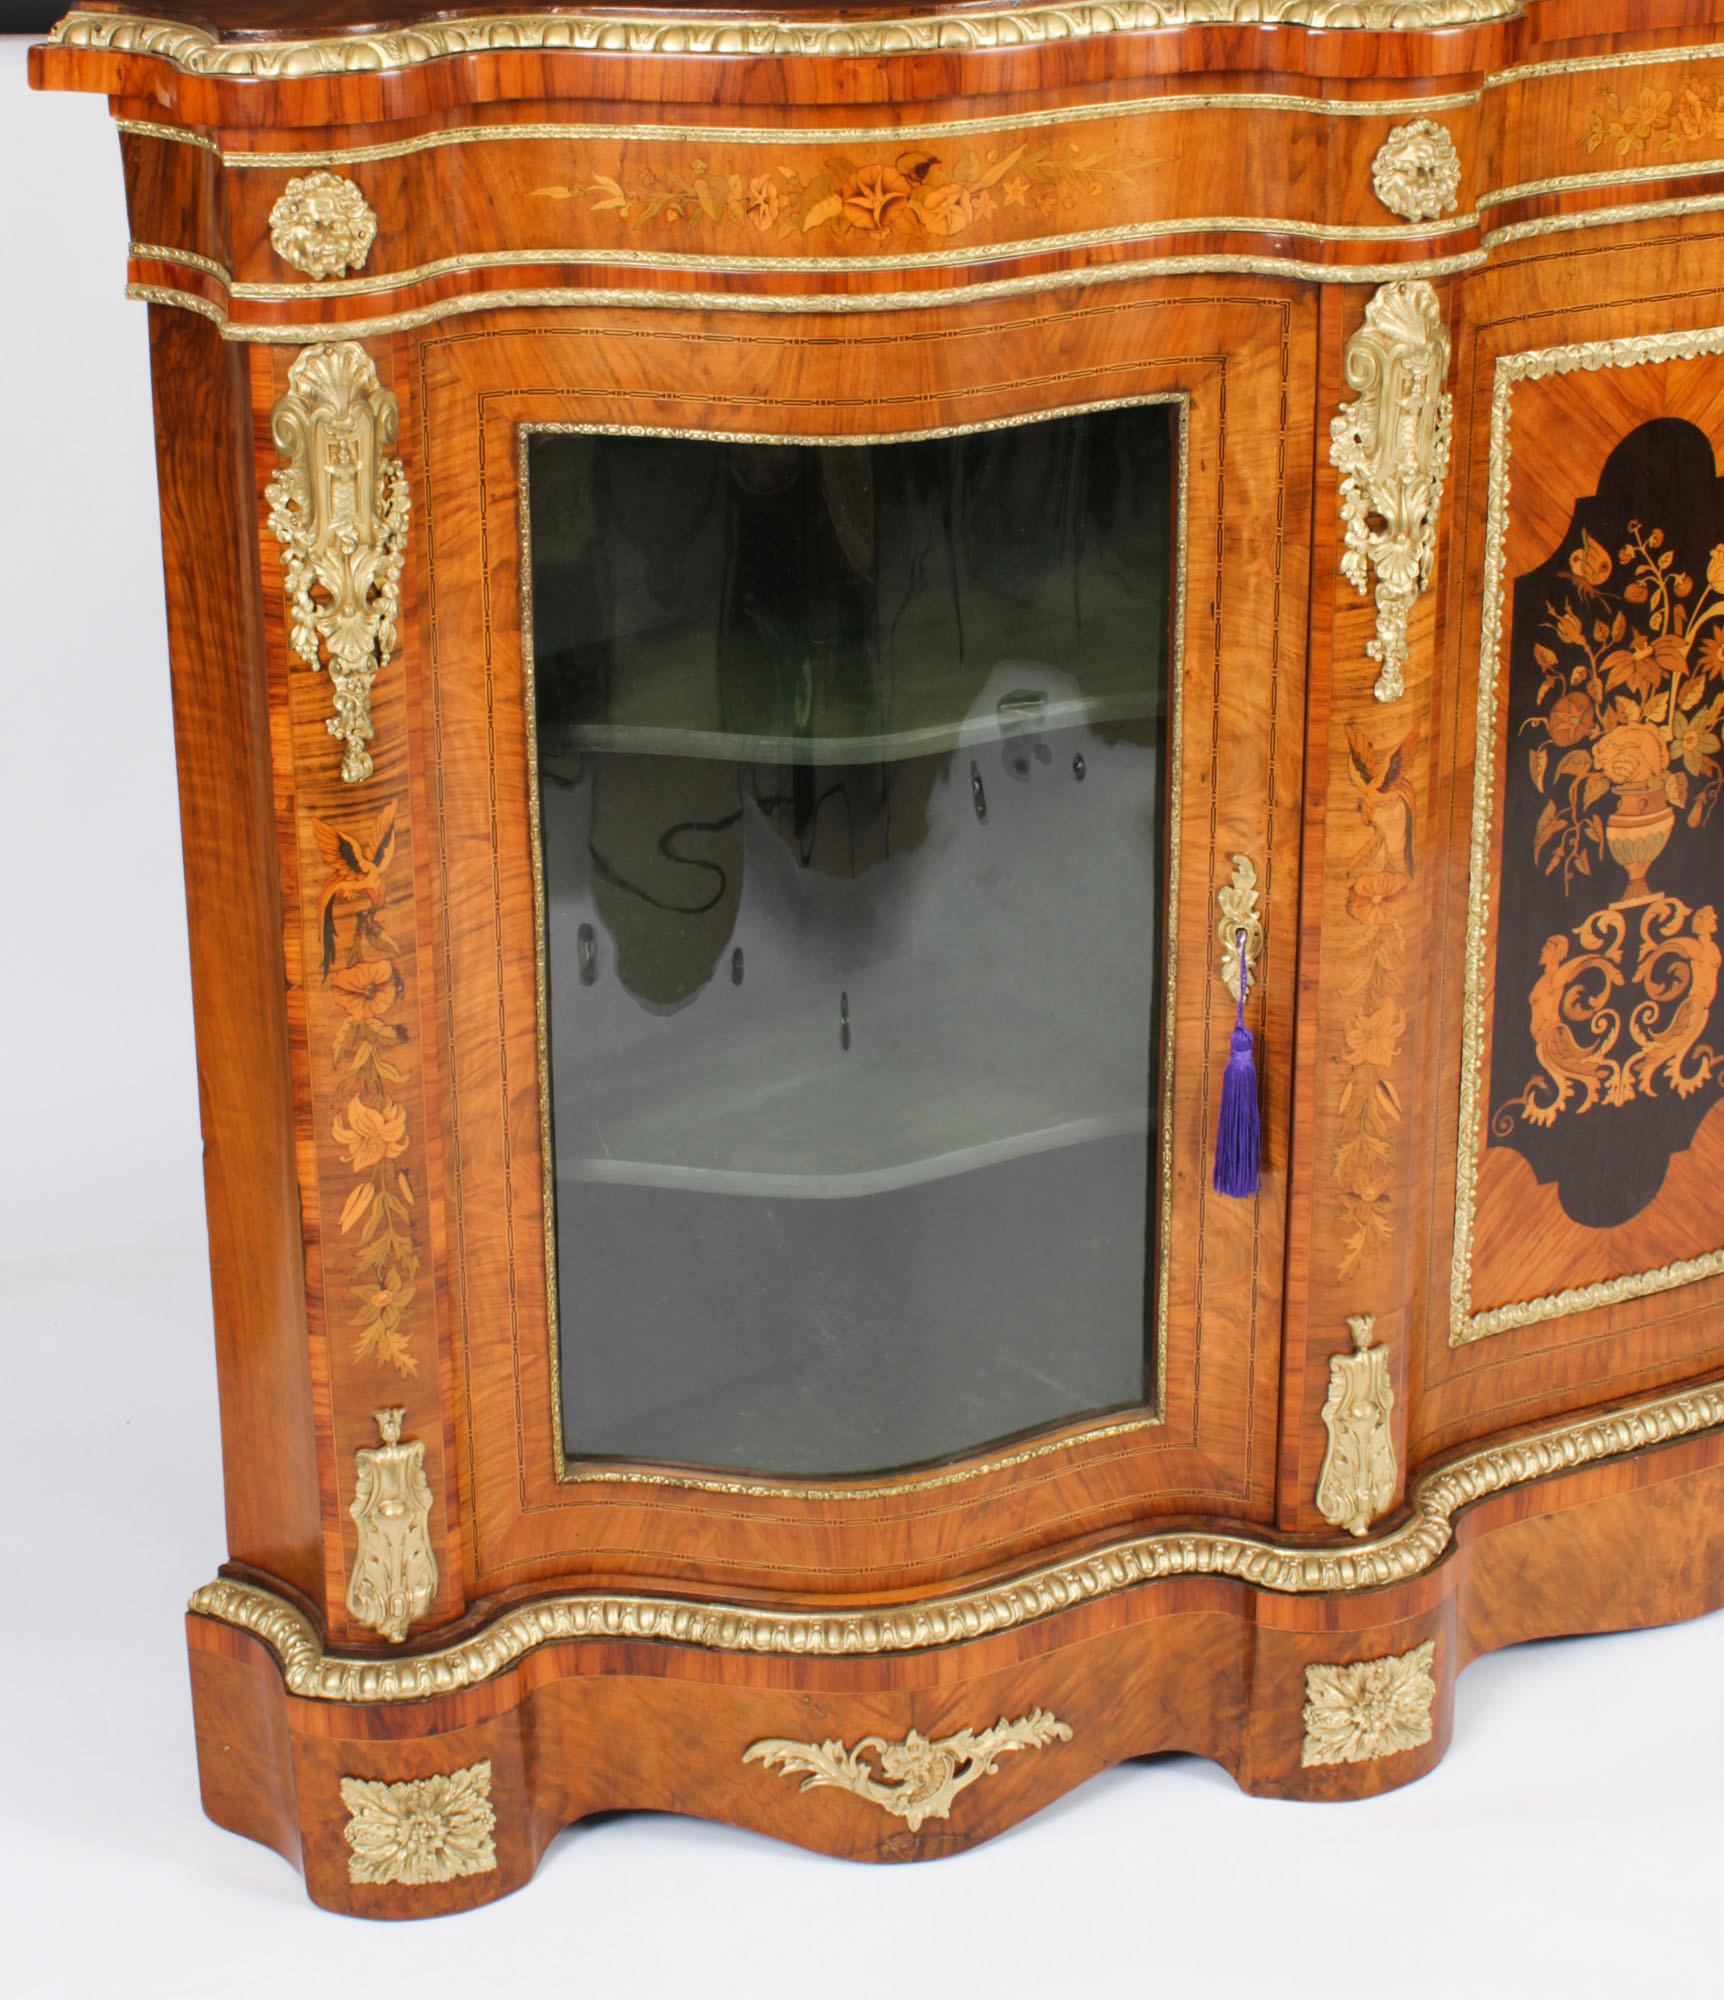 Antique Large Ormolu Mounted Walnut & Marquetry Serpentine Credenza 19th C For Sale 13